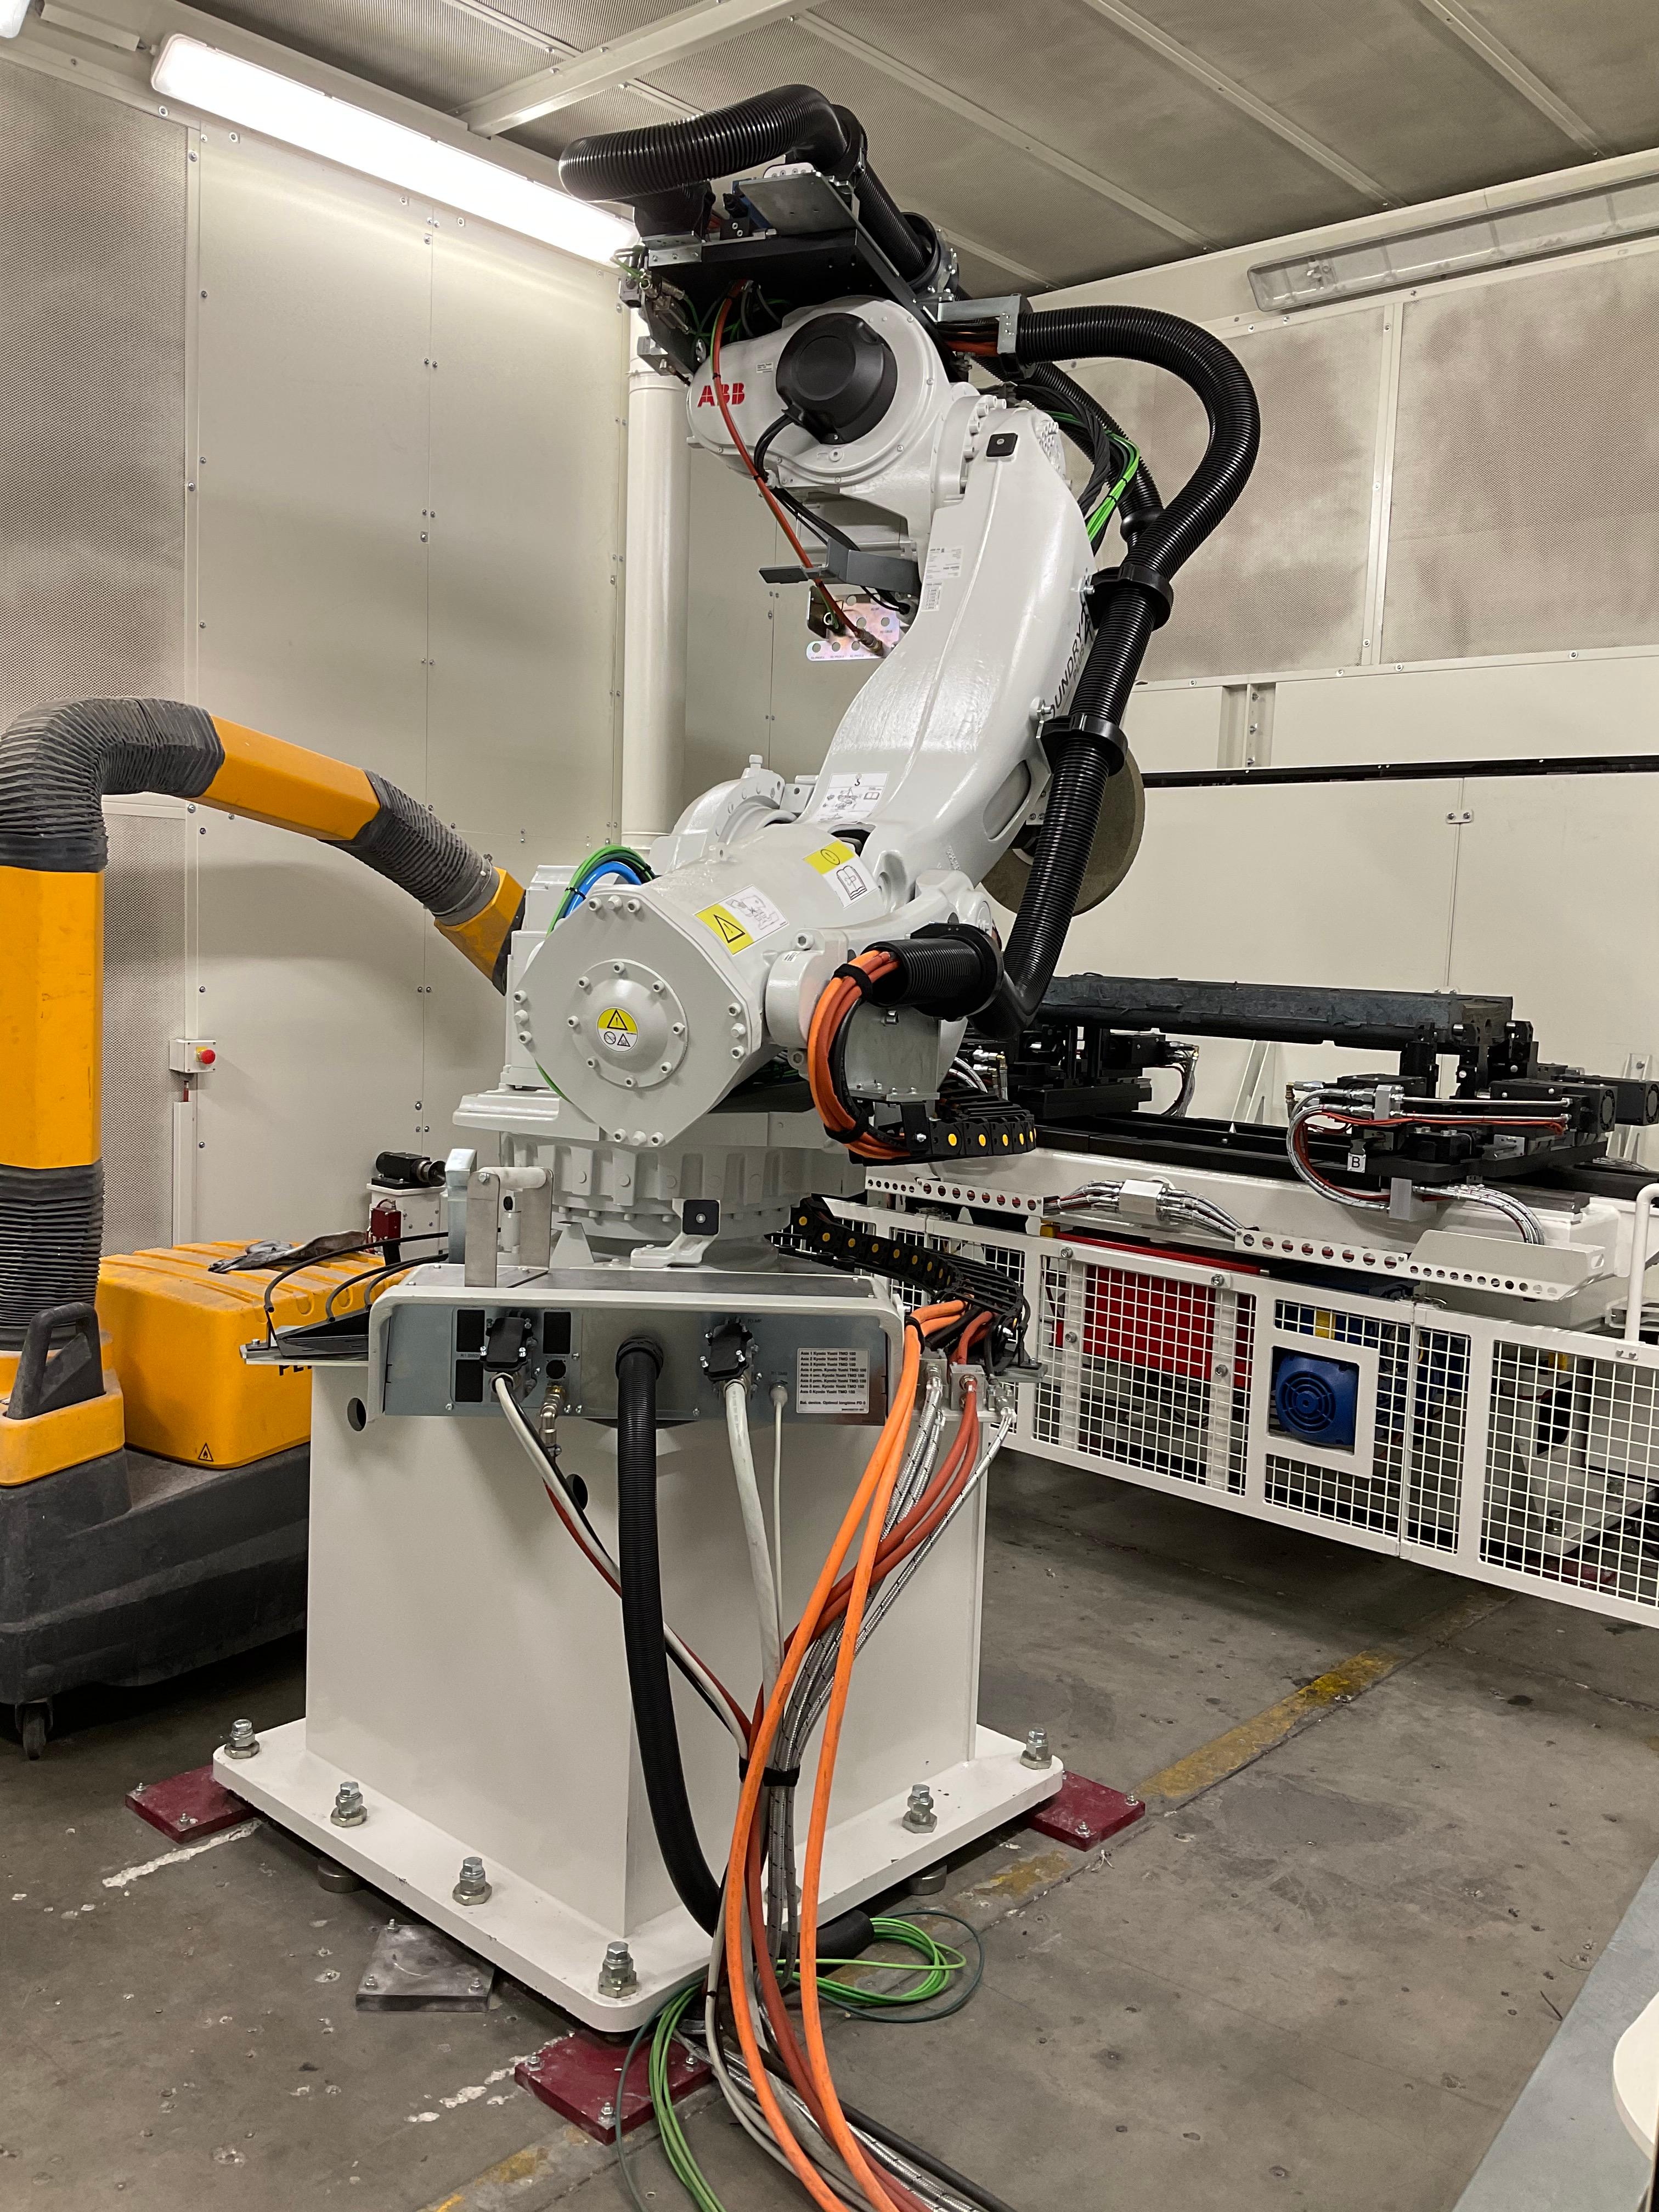 Steel and Robotics: Our Partner's Latest Manufacturing Advancements